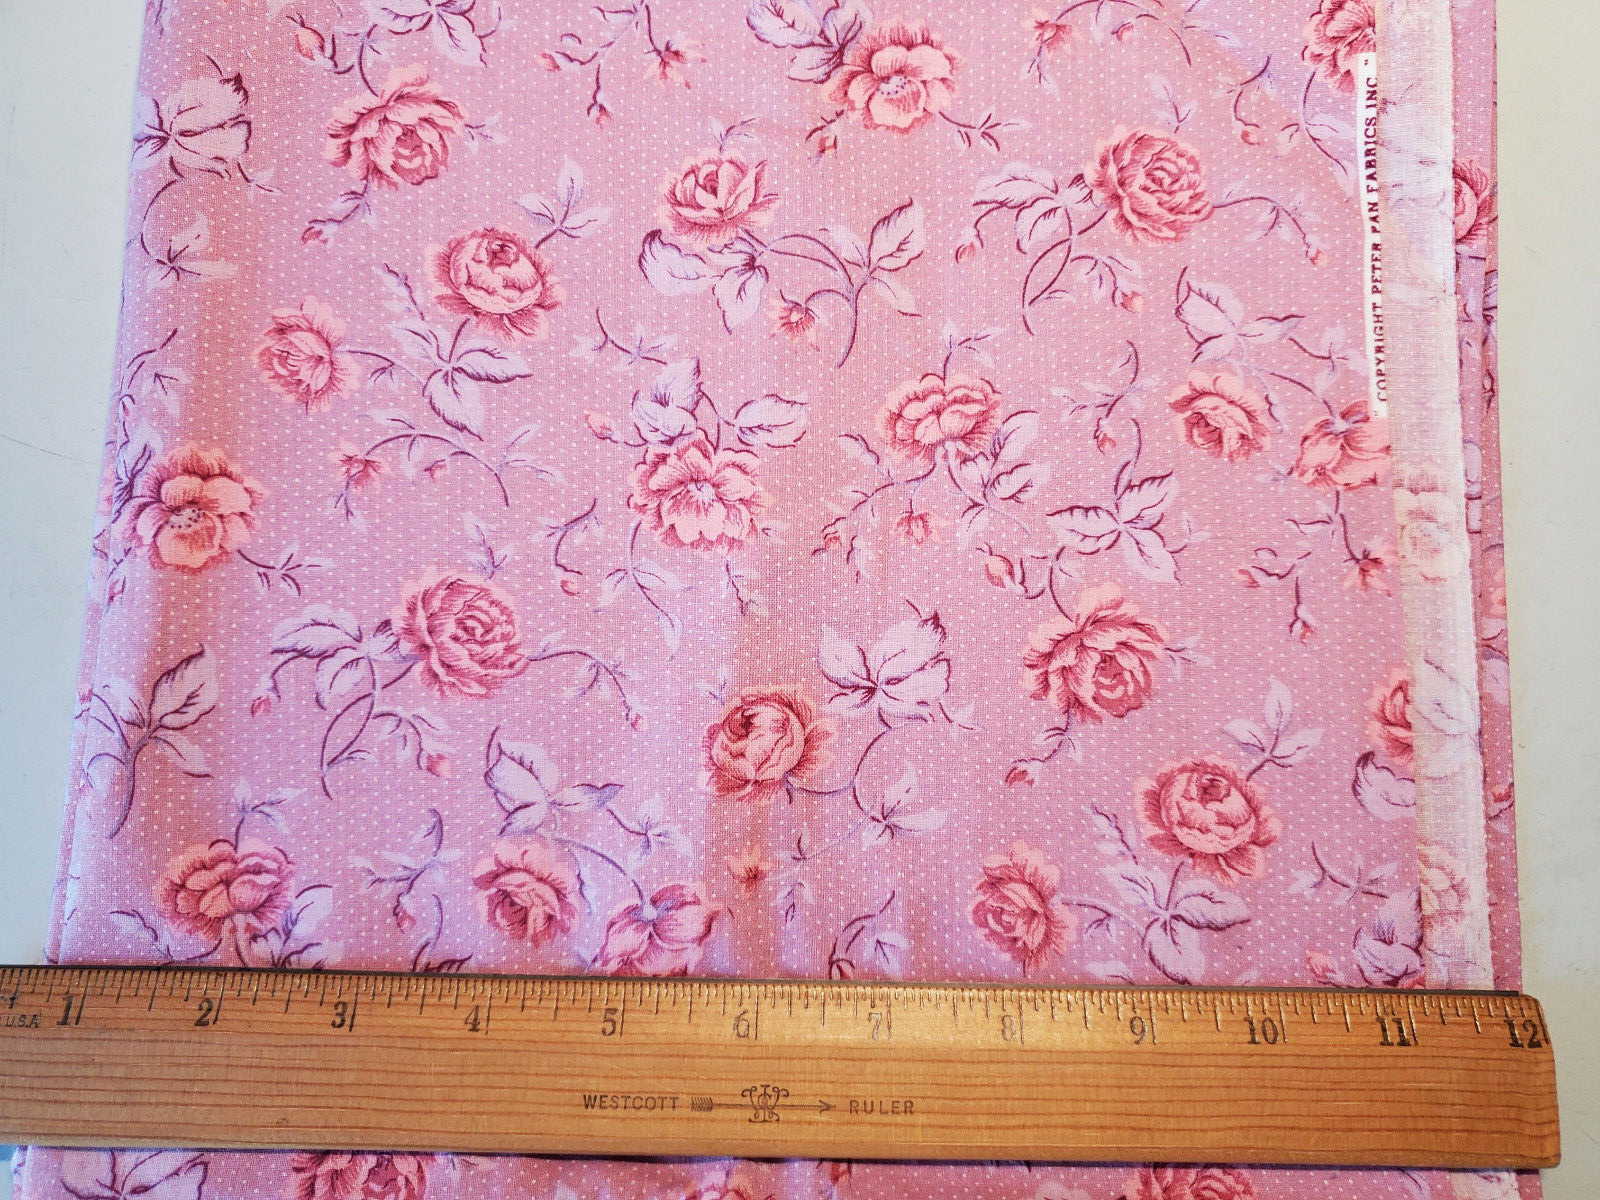 Vintage Peter Pan Brand Pink Floral Cotton Fabric Roses with Polka Dots 1+ Yards